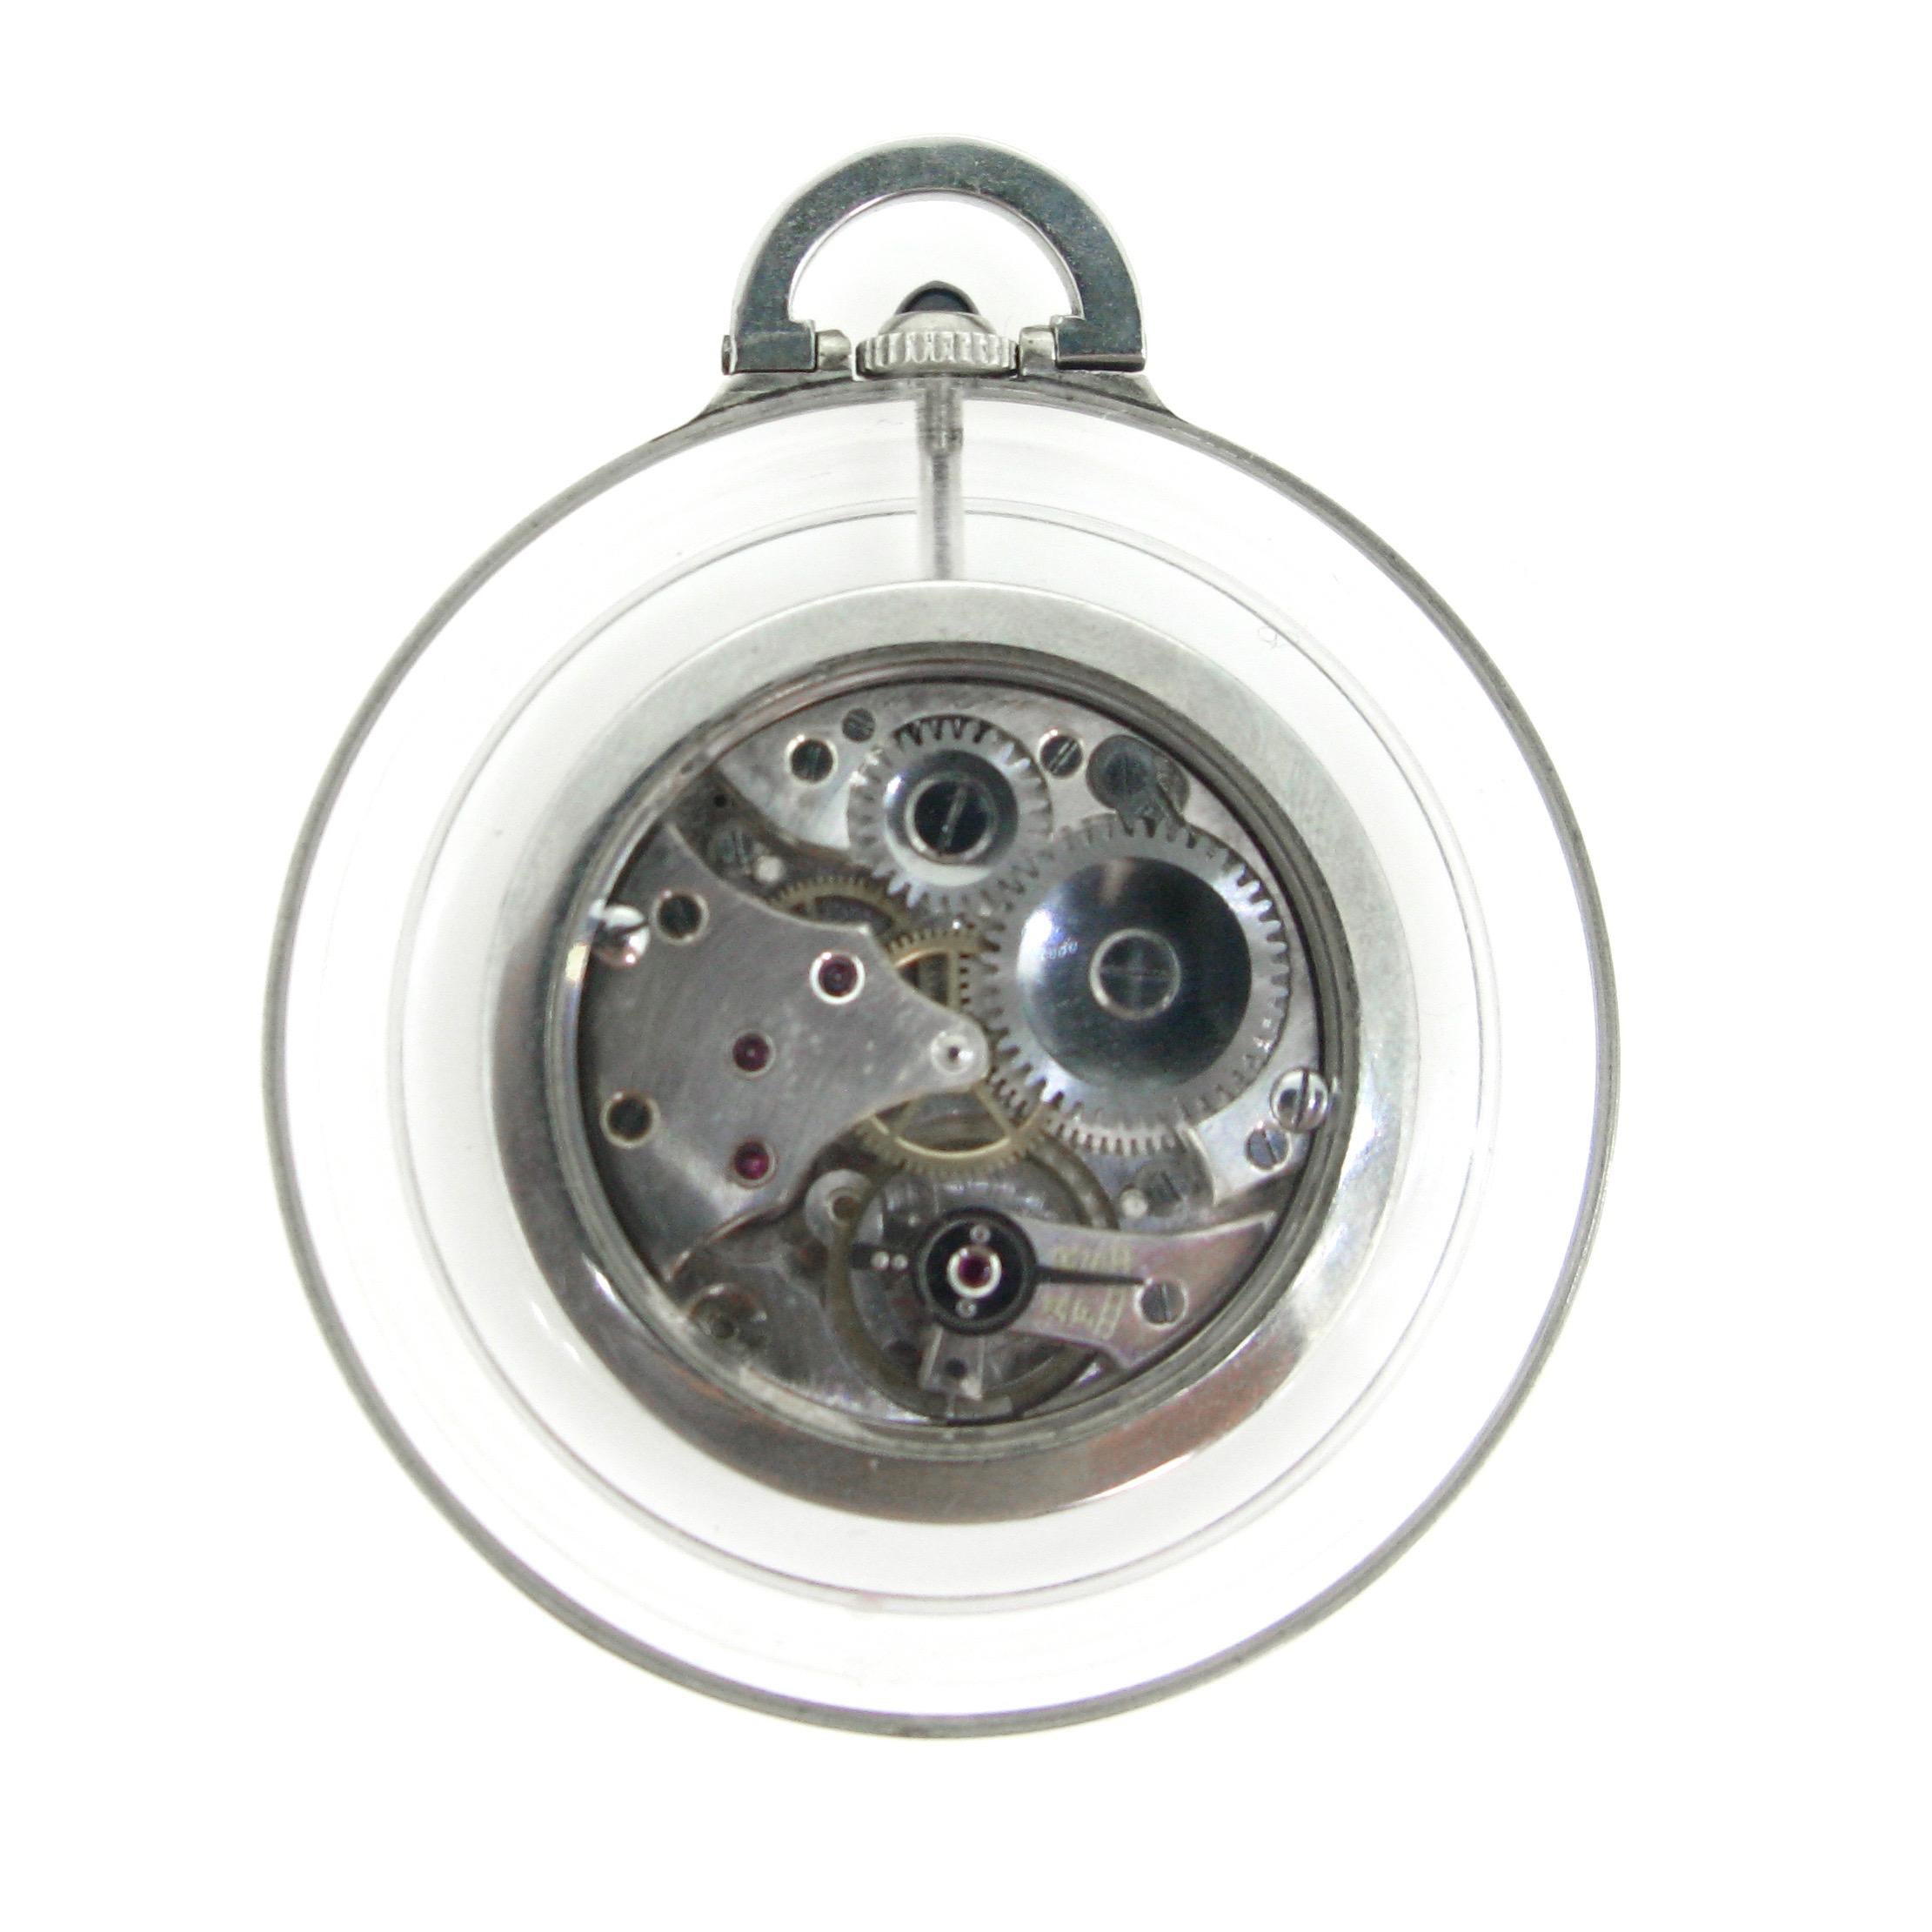 This Art Deco pocket watch is set within a reeded Crystal Rock circular frame. The winding crown is set with a cabochon sapphire. It is signed Lacloche. The movement is visible through the back of the watch.  The movement is a manual wind and it is